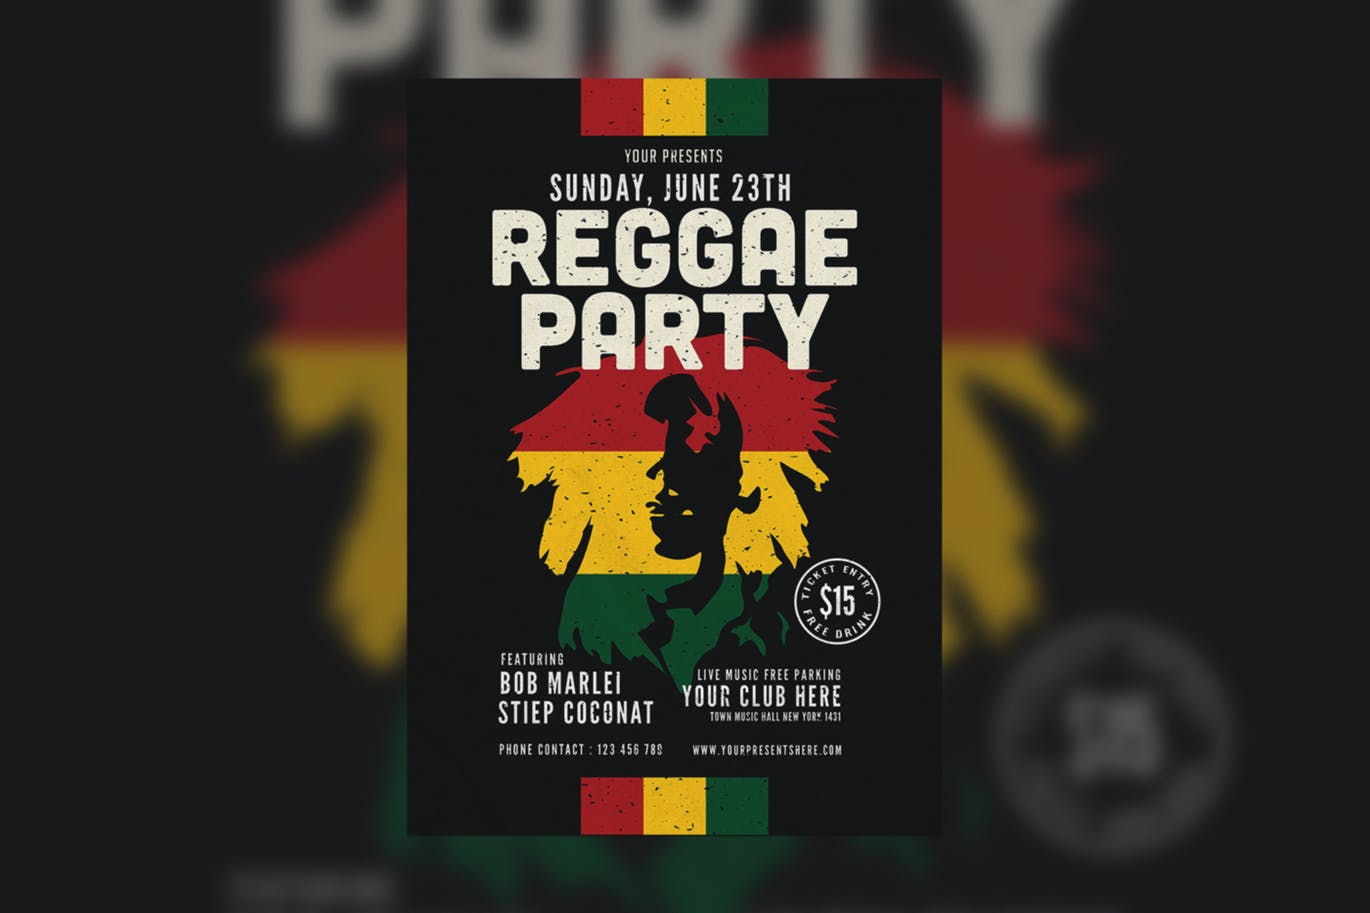 A reggae party music flyer template